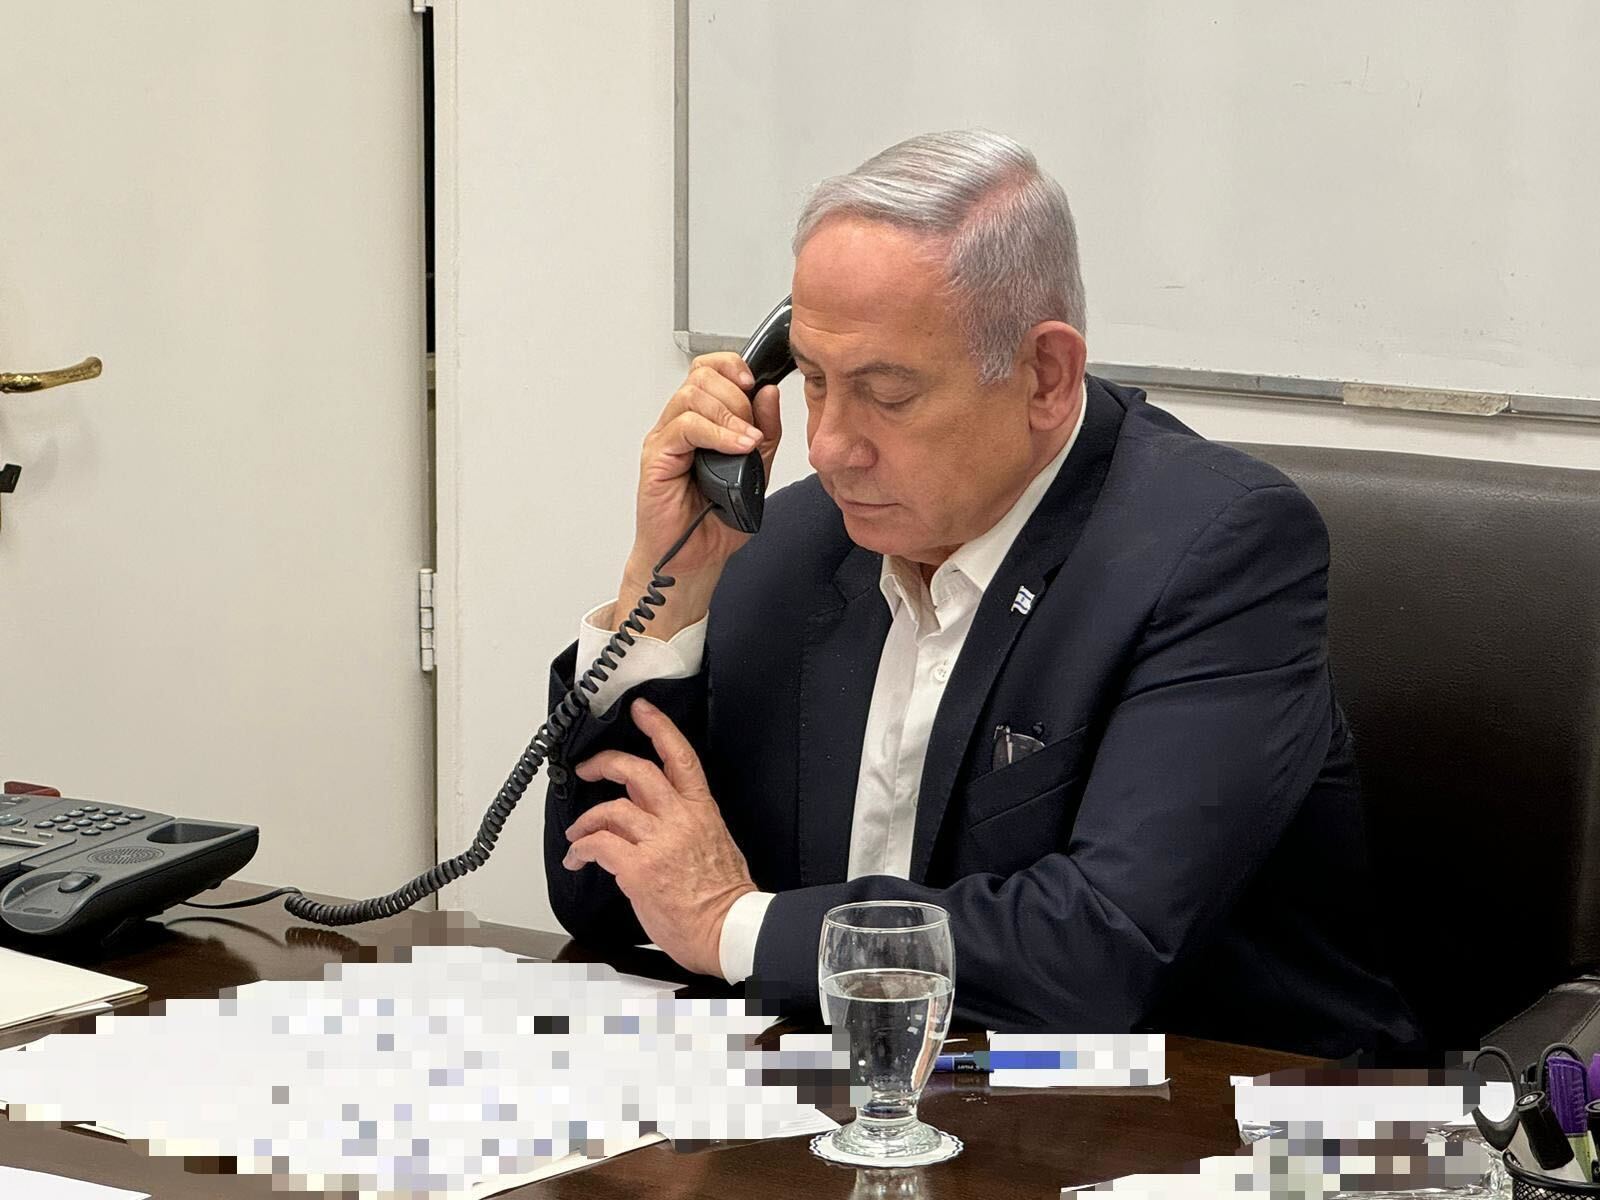 Prime minister Benjamin Netanyahu after the Iranian missile attacks on Israel